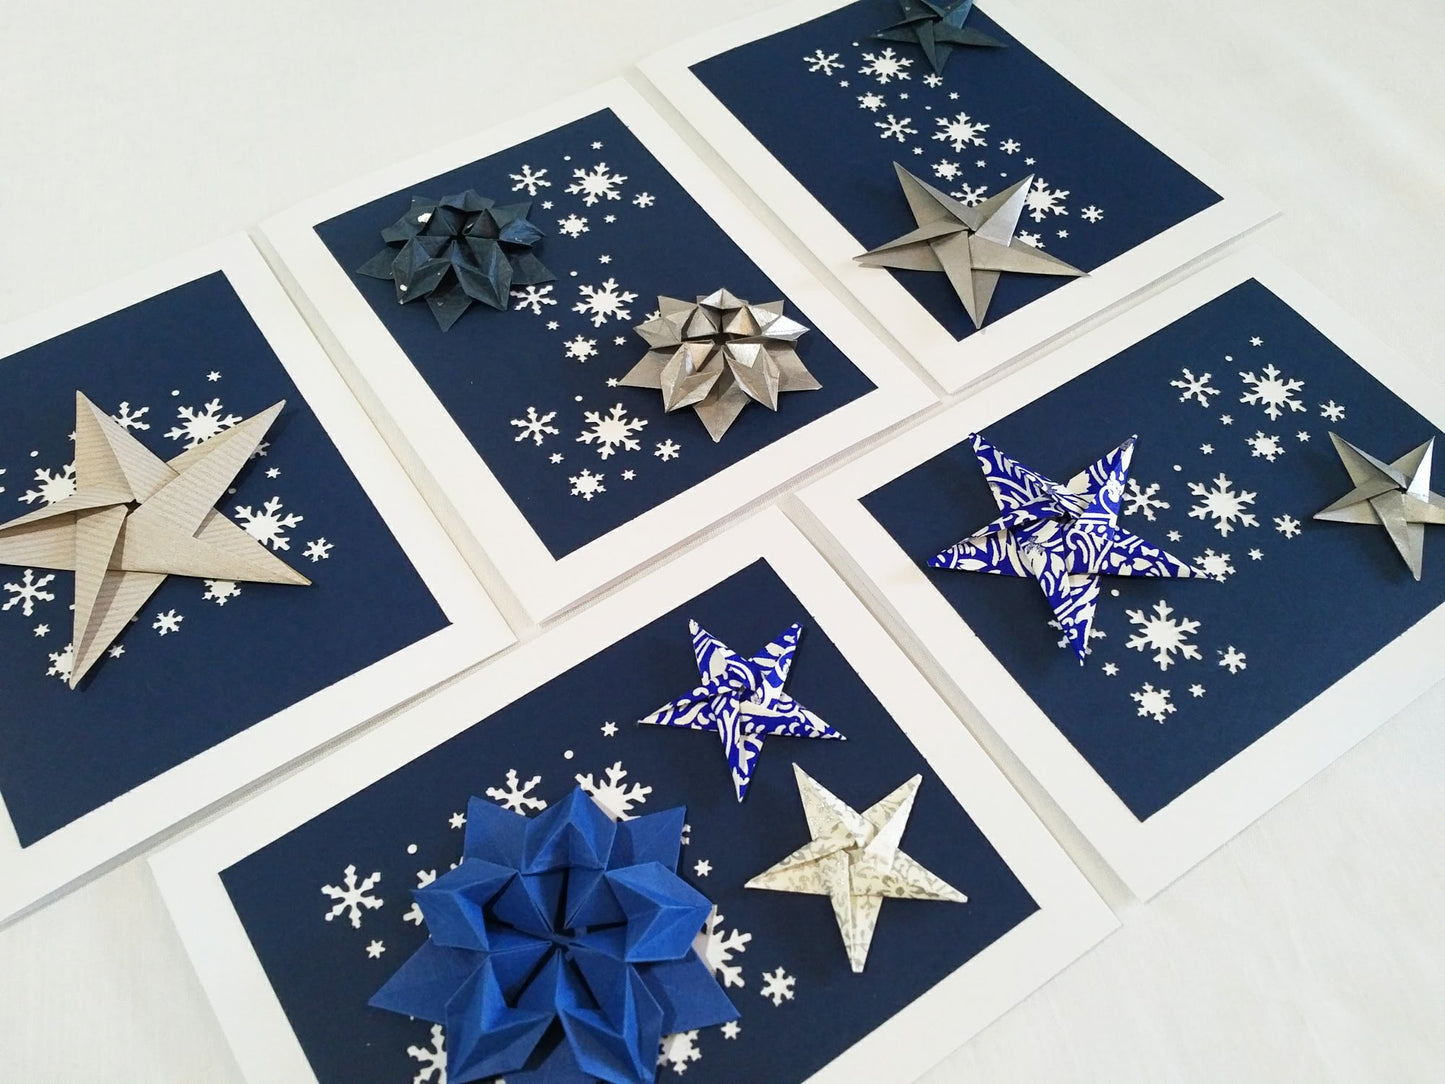 Set of five white cards. Each card has a dark blue background with white snowflakes. On top are a variety of origami stars in silver, white, and blue.